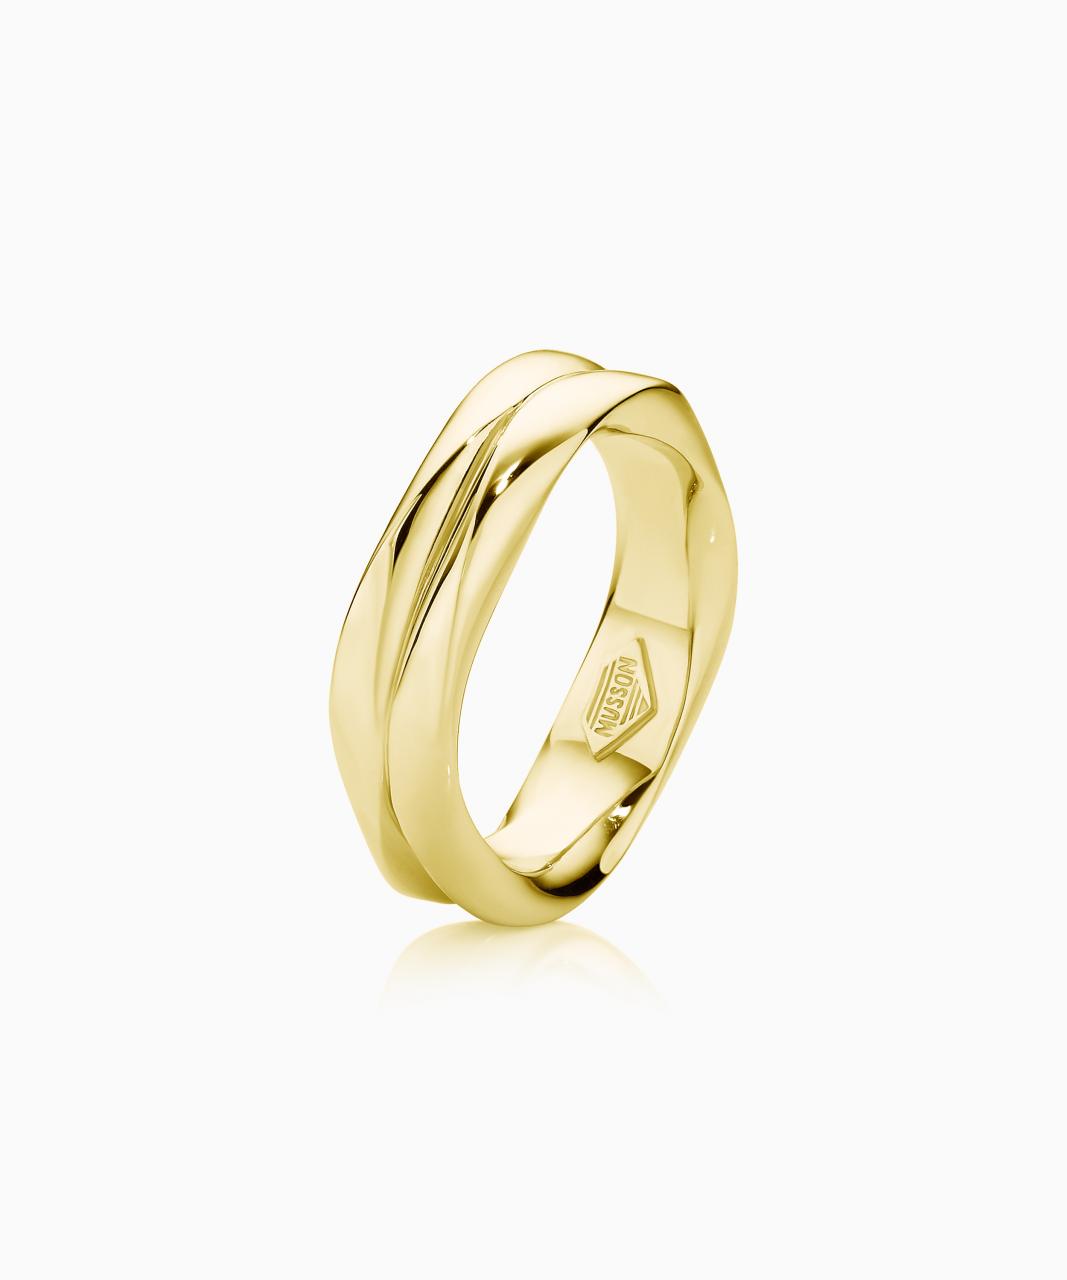 Entwined Wedding Ring - 7mm